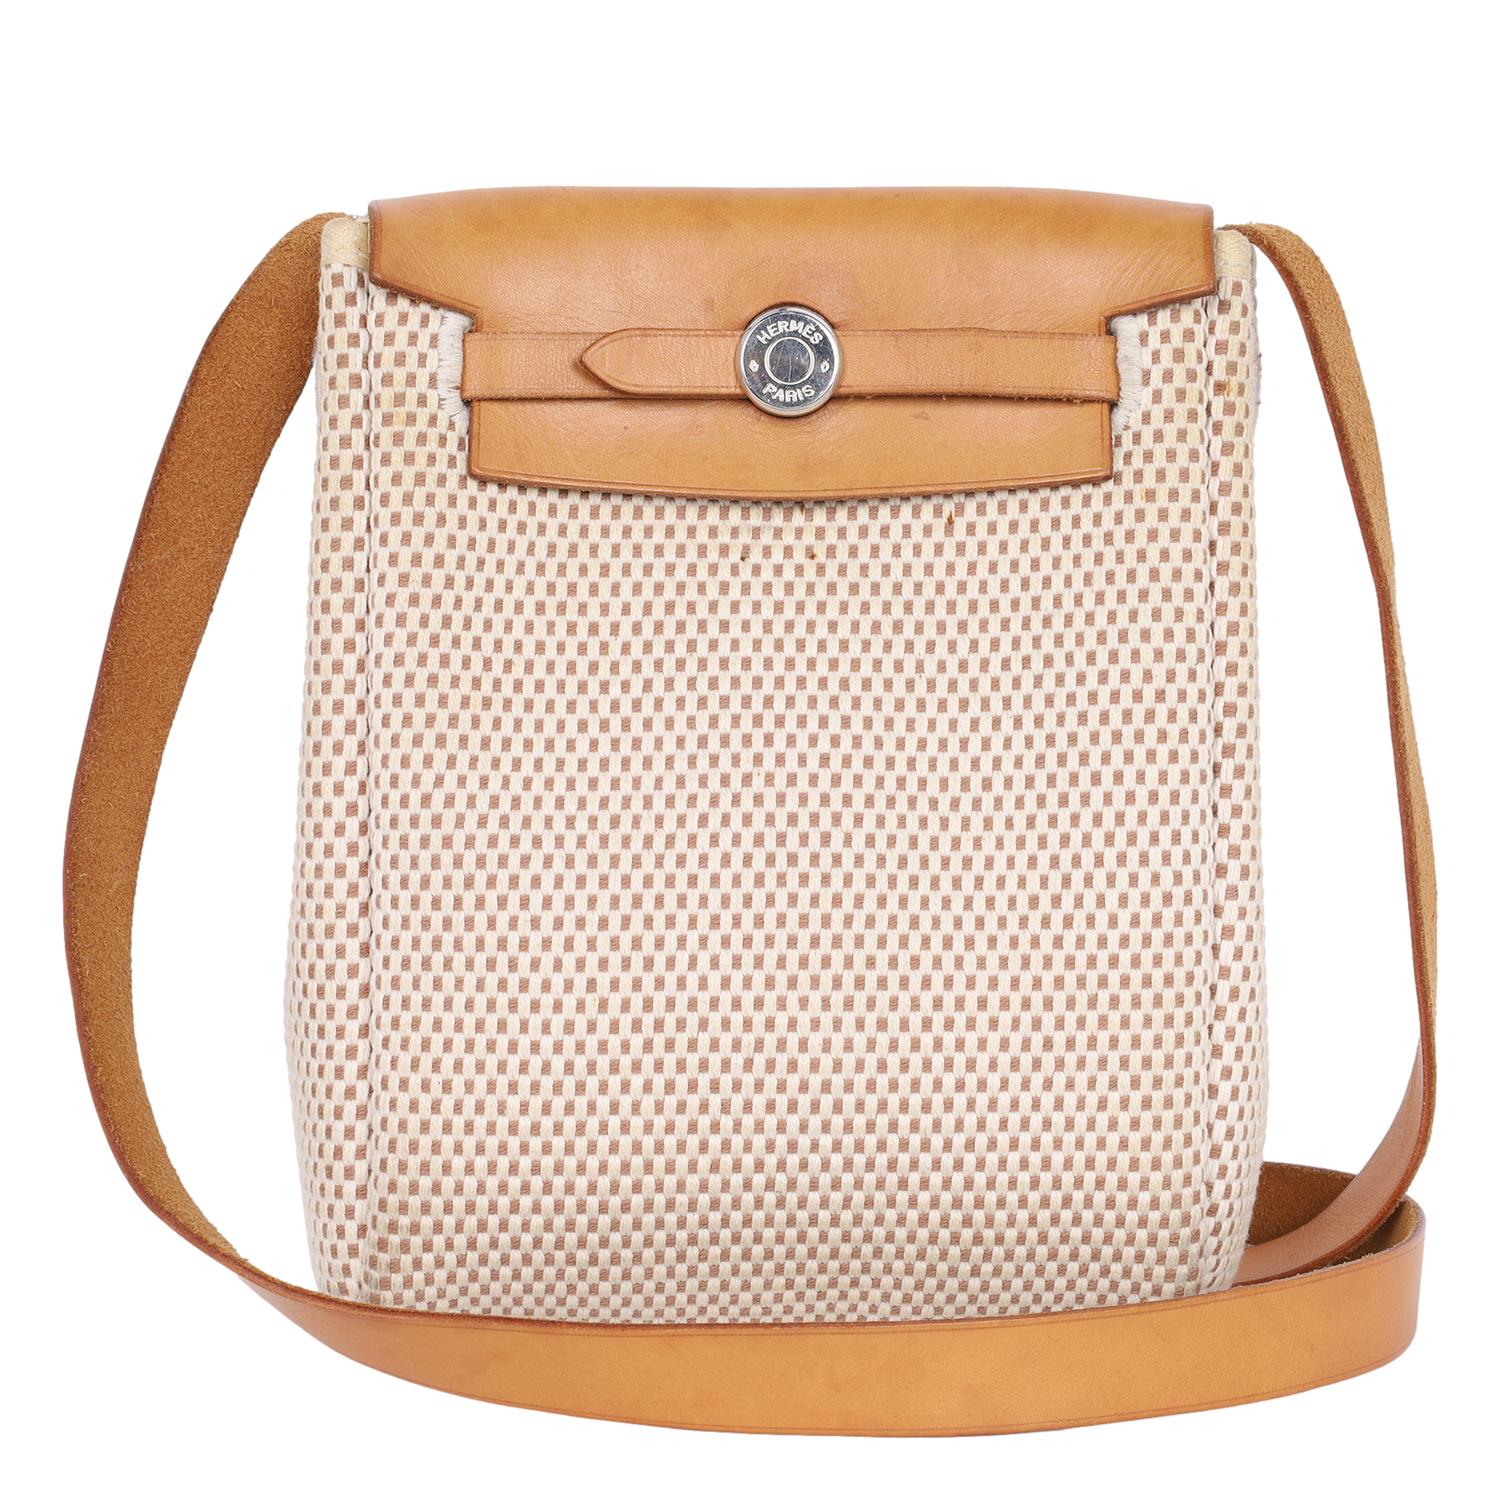 Authentic pre-loved Hermes Herbag TPM mini crossbody bag in beige and black.

Features beige and also a black toile canvas, changeable leather top with a flap, silver hardware, long leather shoulder strap. This unique bag can be used as beige or